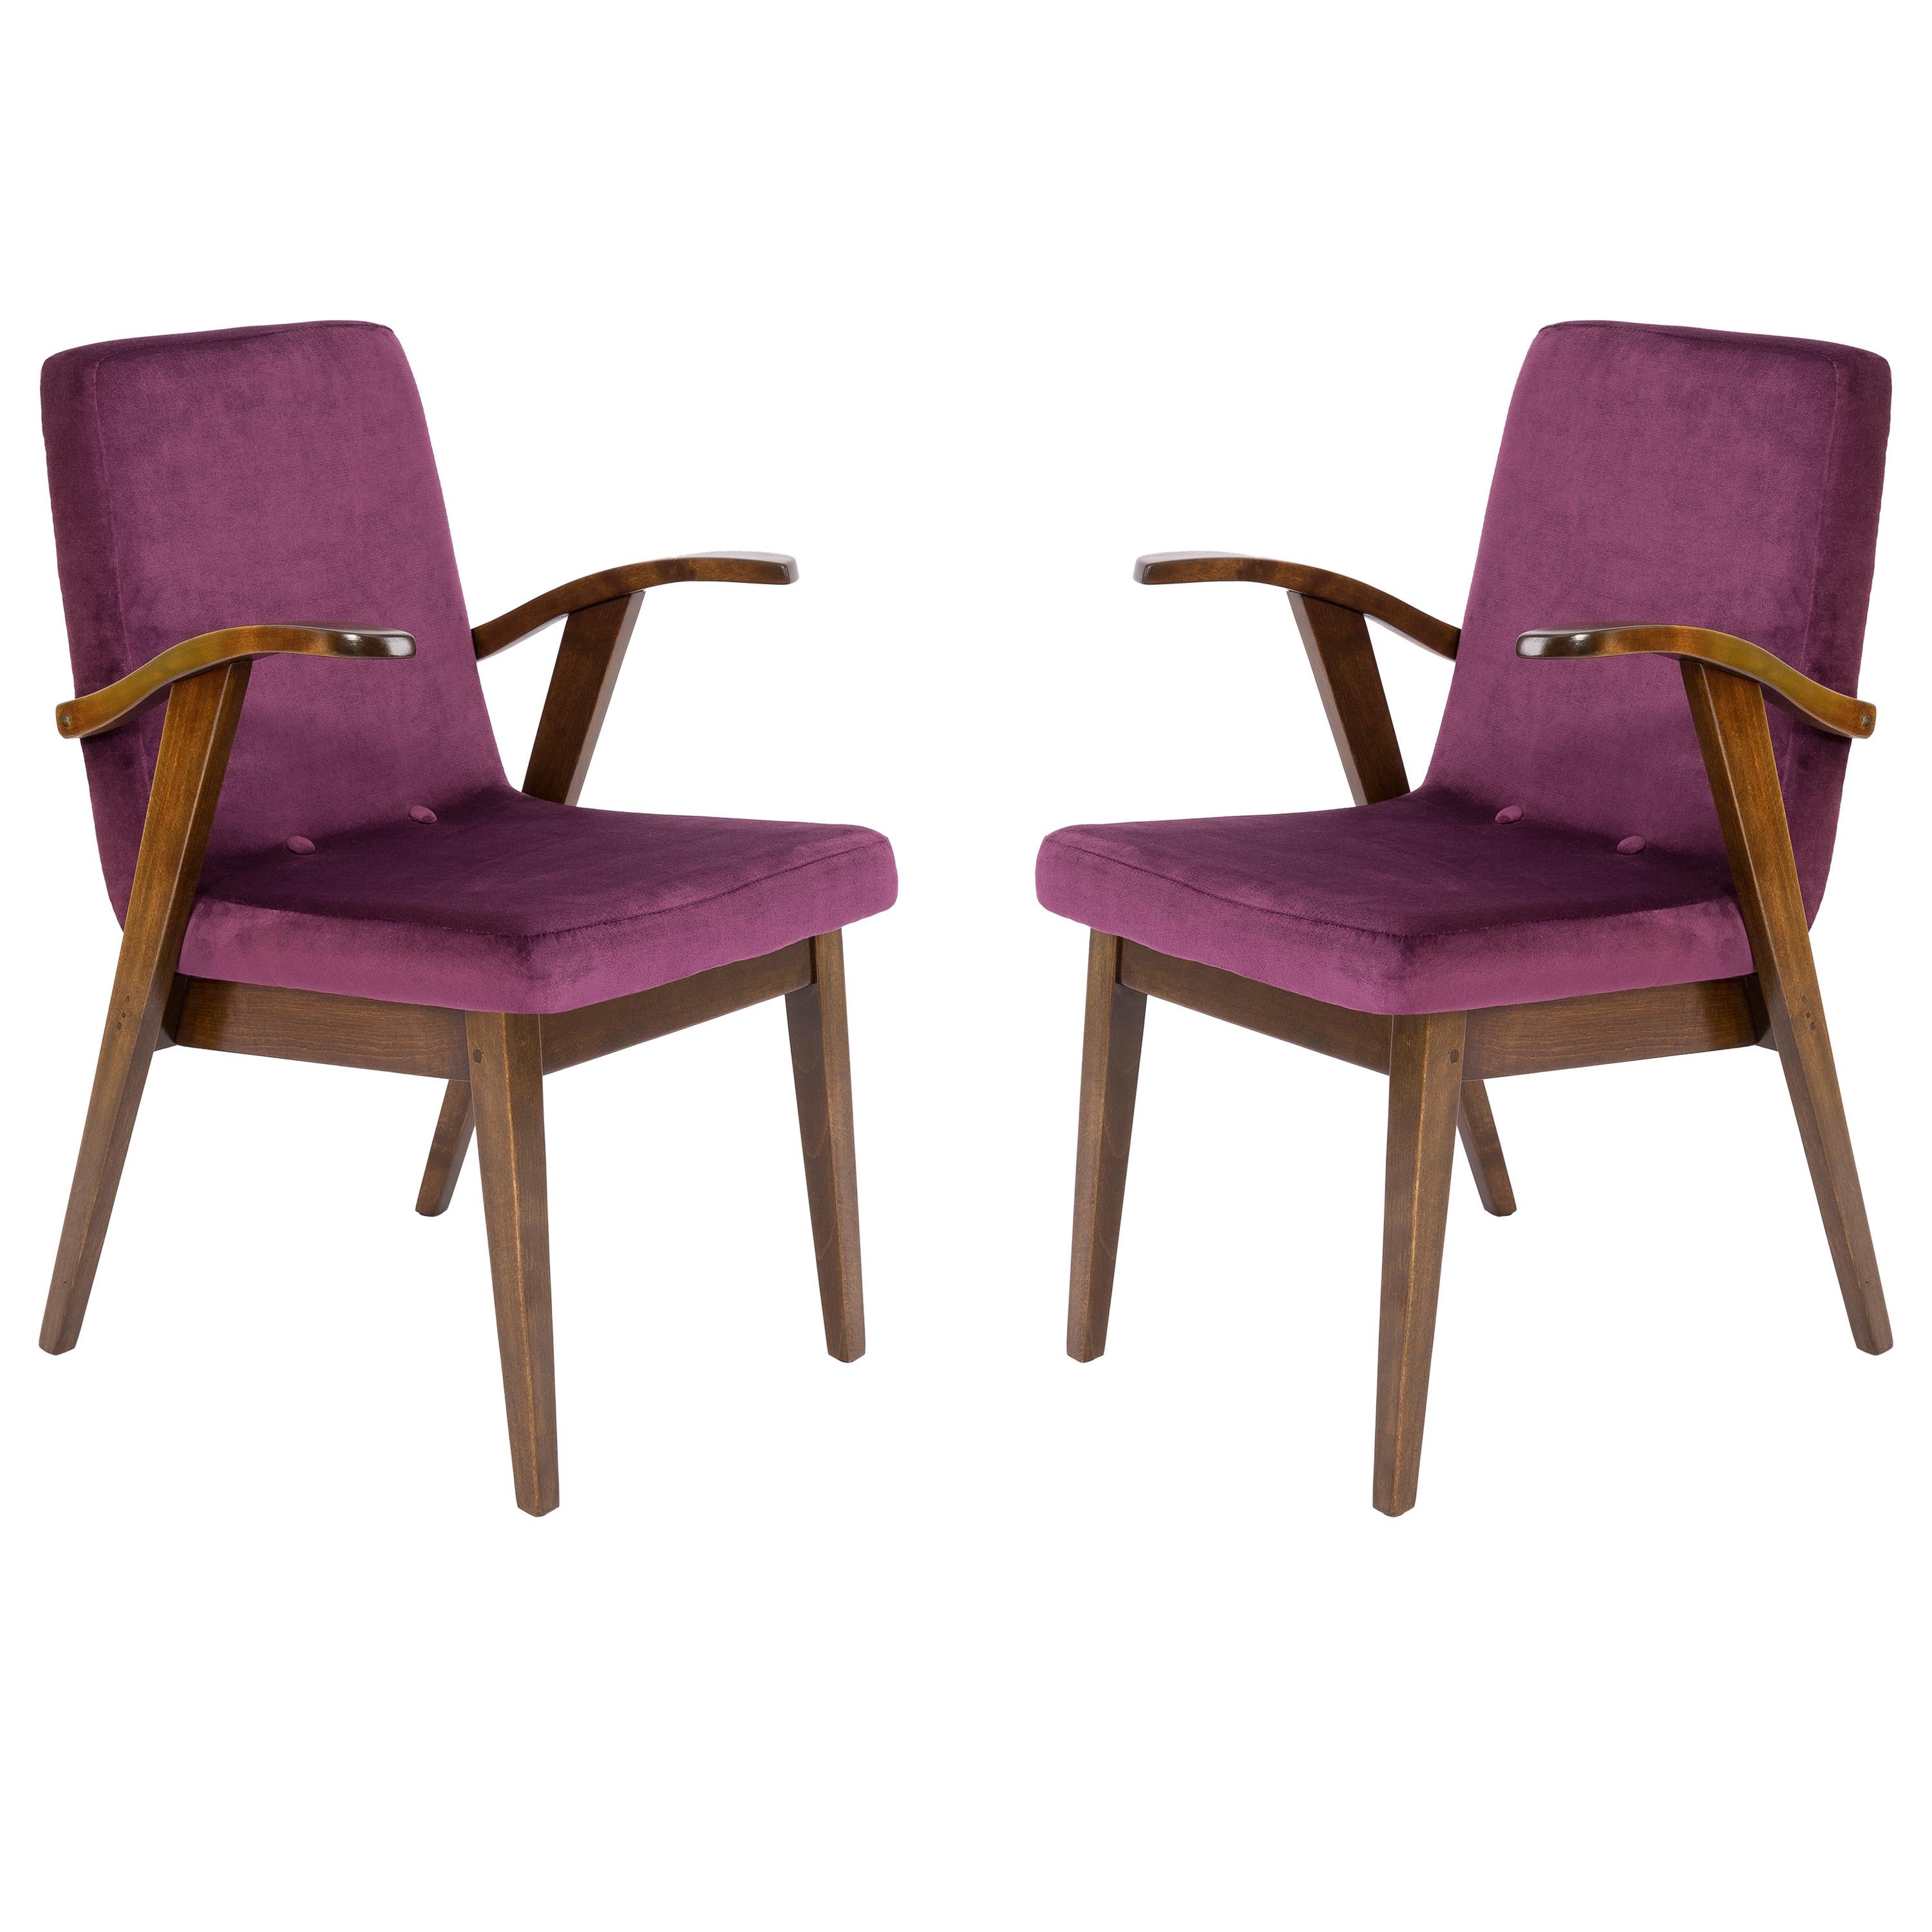 Set of Two 20th Century Vintage Plum Violet Armchair by Mieczyslaw Puchala 1960s For Sale